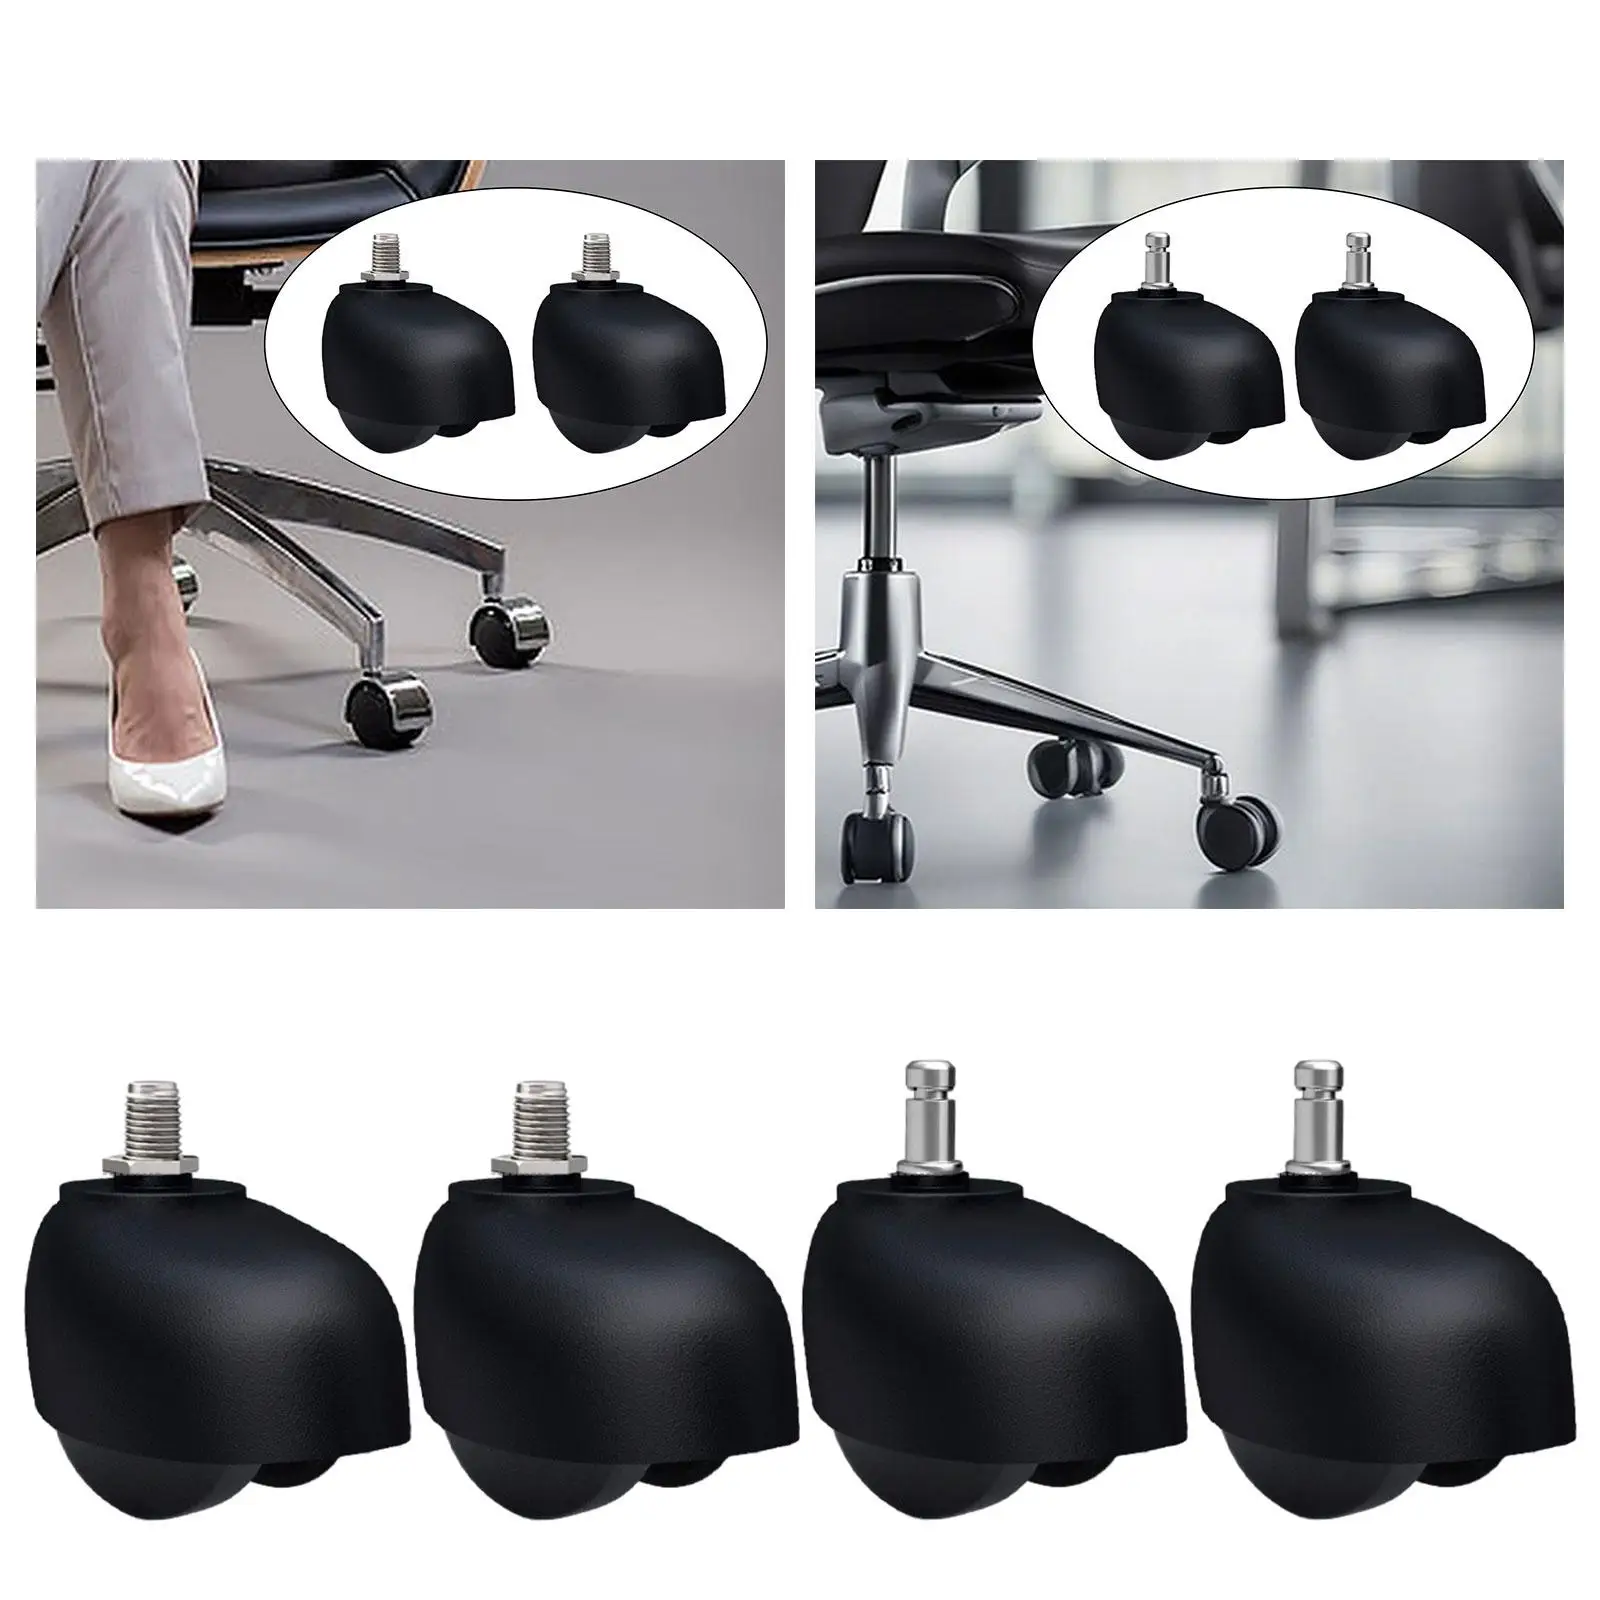 2 Pieces Replacement Office Chair Wheels, Desk Chair Wheels, Universal Heavy Duty Swivel Chair Wheels, for Computer Chairs